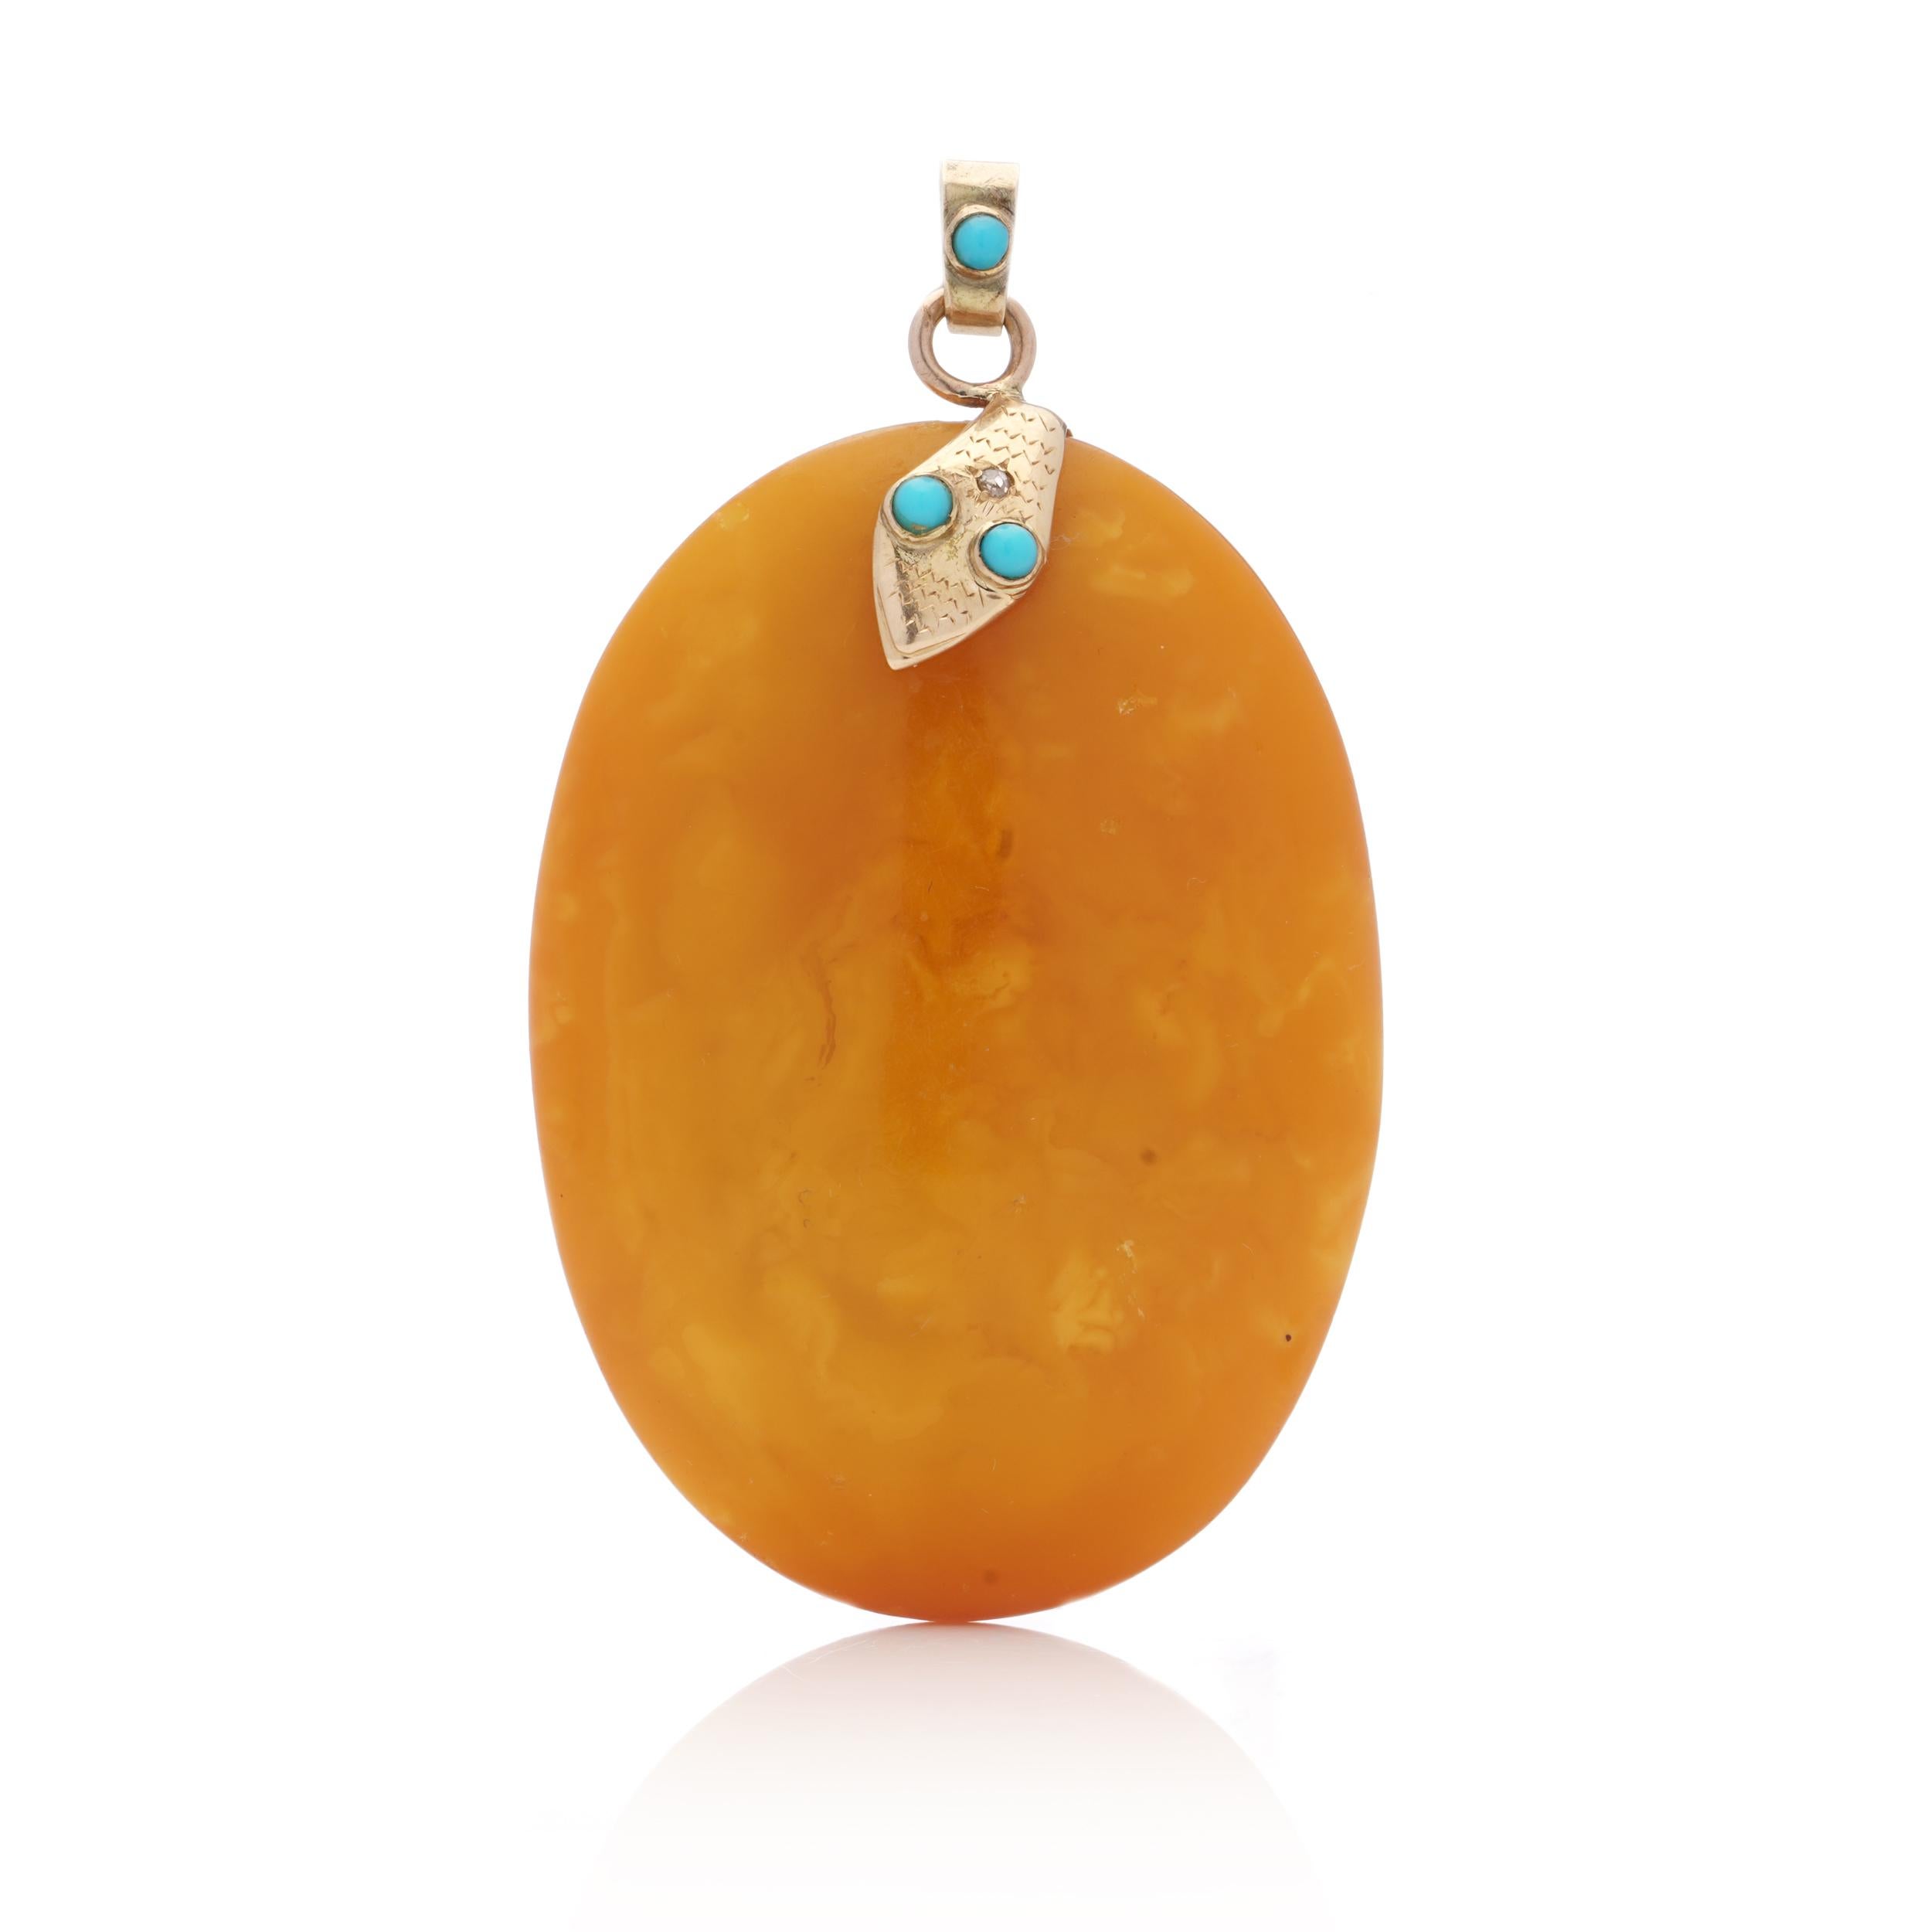 Vintage Amber pendant with 9kt. rose gold mount in the shape of a serpent's head, set with turquoise and diamond.

Made in England, 1986
Fully hallmarked.

Dimensions:
Amber size: 6 x 4.2 x 1.5 cm
Weight: 24 grams

Turquoises -
Quantity: 3
Carat